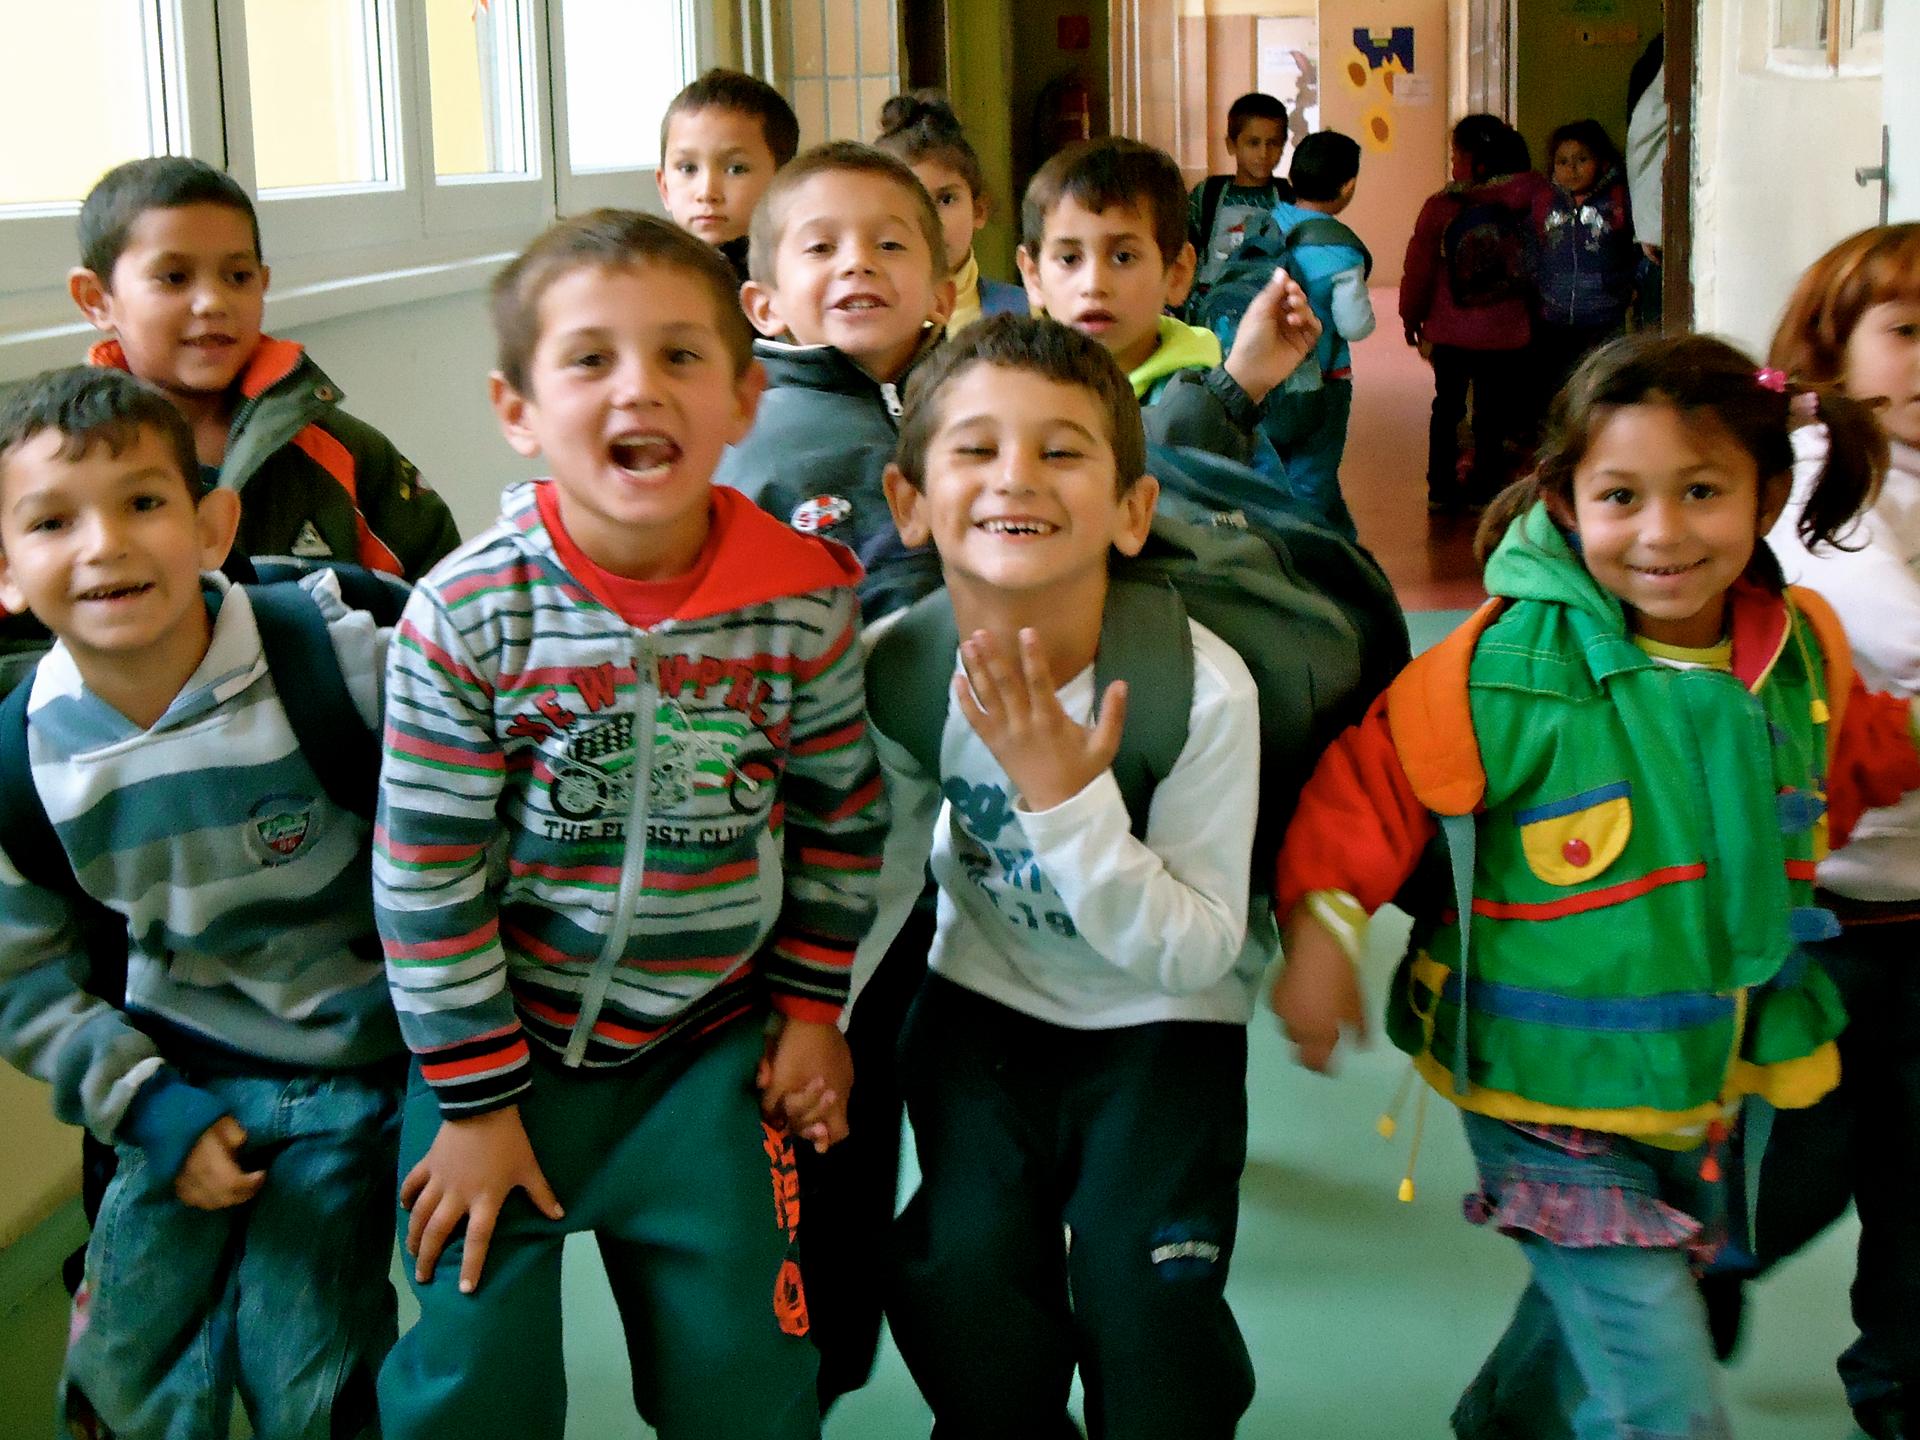 A group of young Roma students goof off in the hallway of Šarišské Michaľany elementary school.